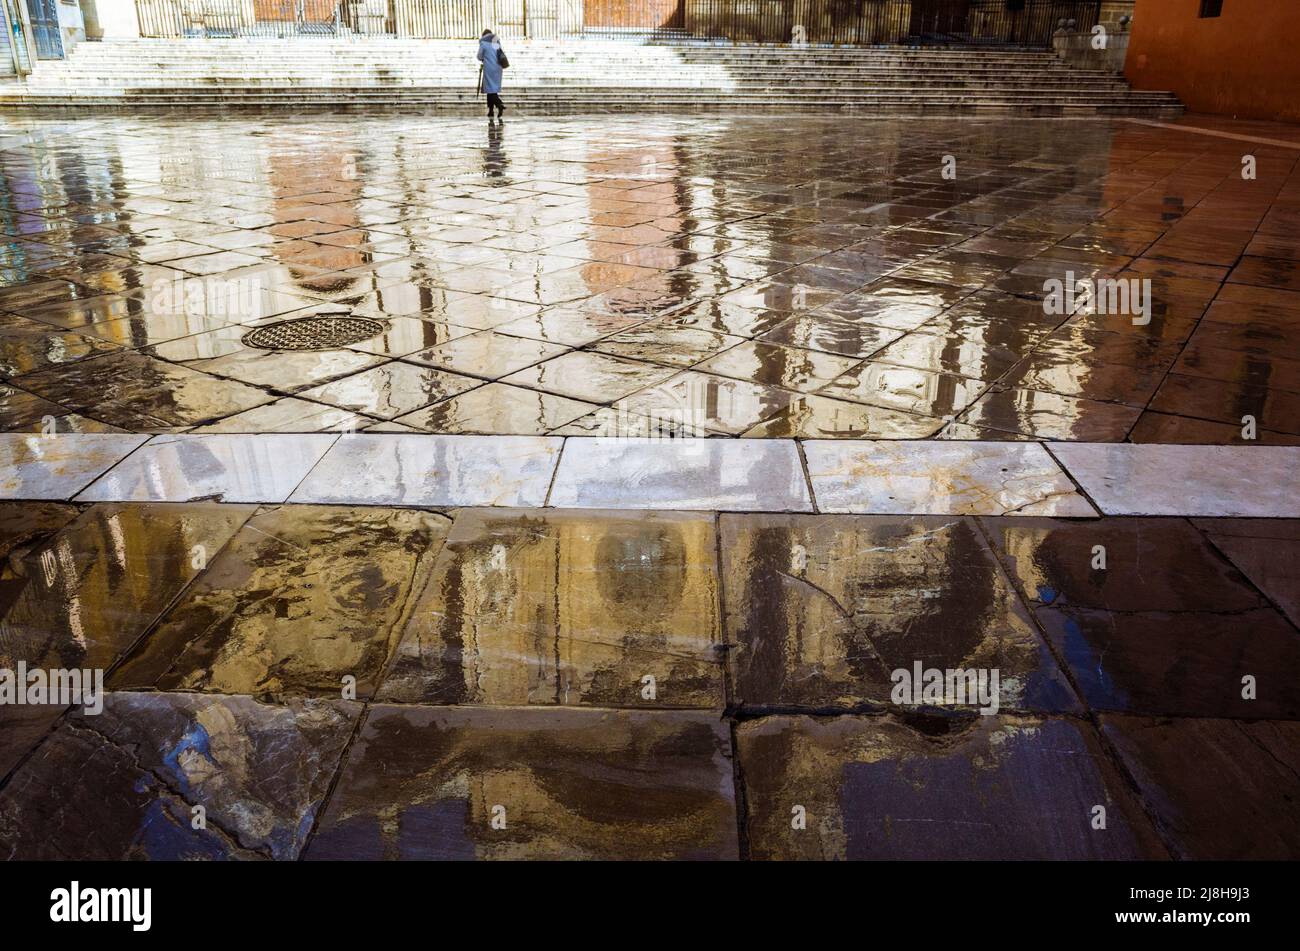 Granada, Andalusia, Spain : A woman walks on the reflection of the Cathedral on the wet pavement of Plaza de las Pasiegas square. Stock Photo